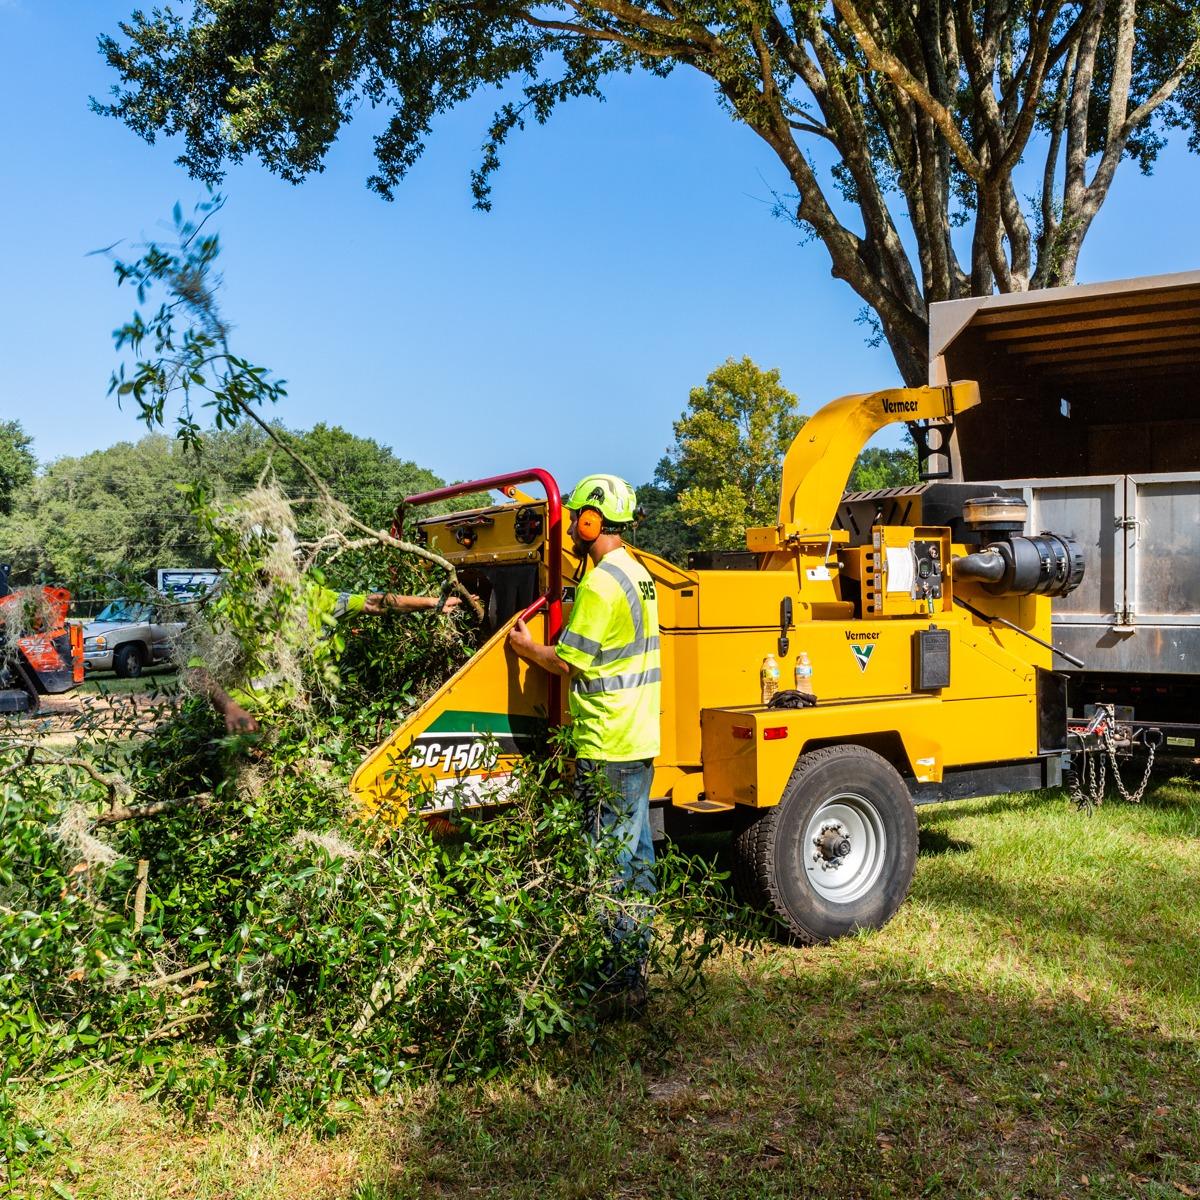 Brush Removal & Wood Chipping Service Micanopy